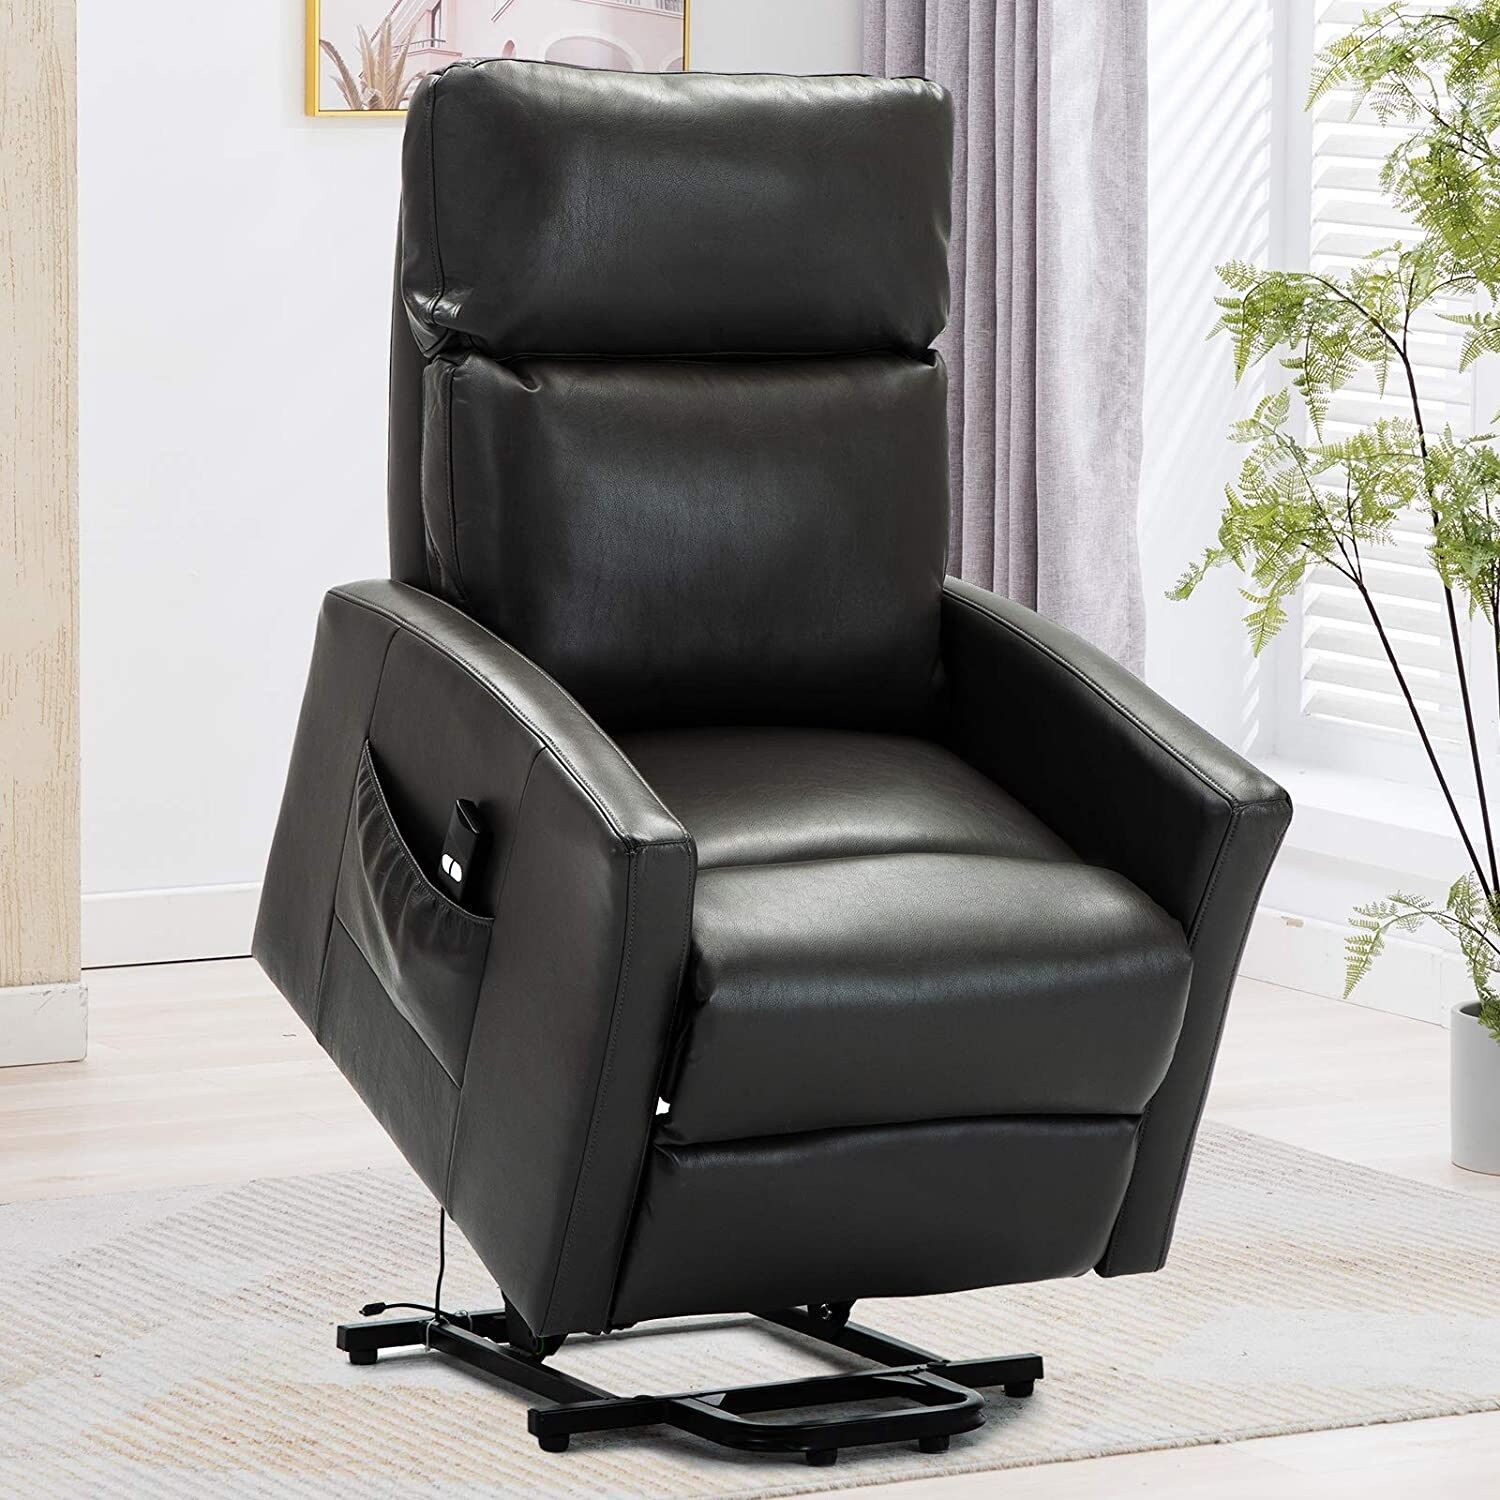 Shop Faux Leather Power Reclining Chair With Remote For Home Theater Overstock 32142850